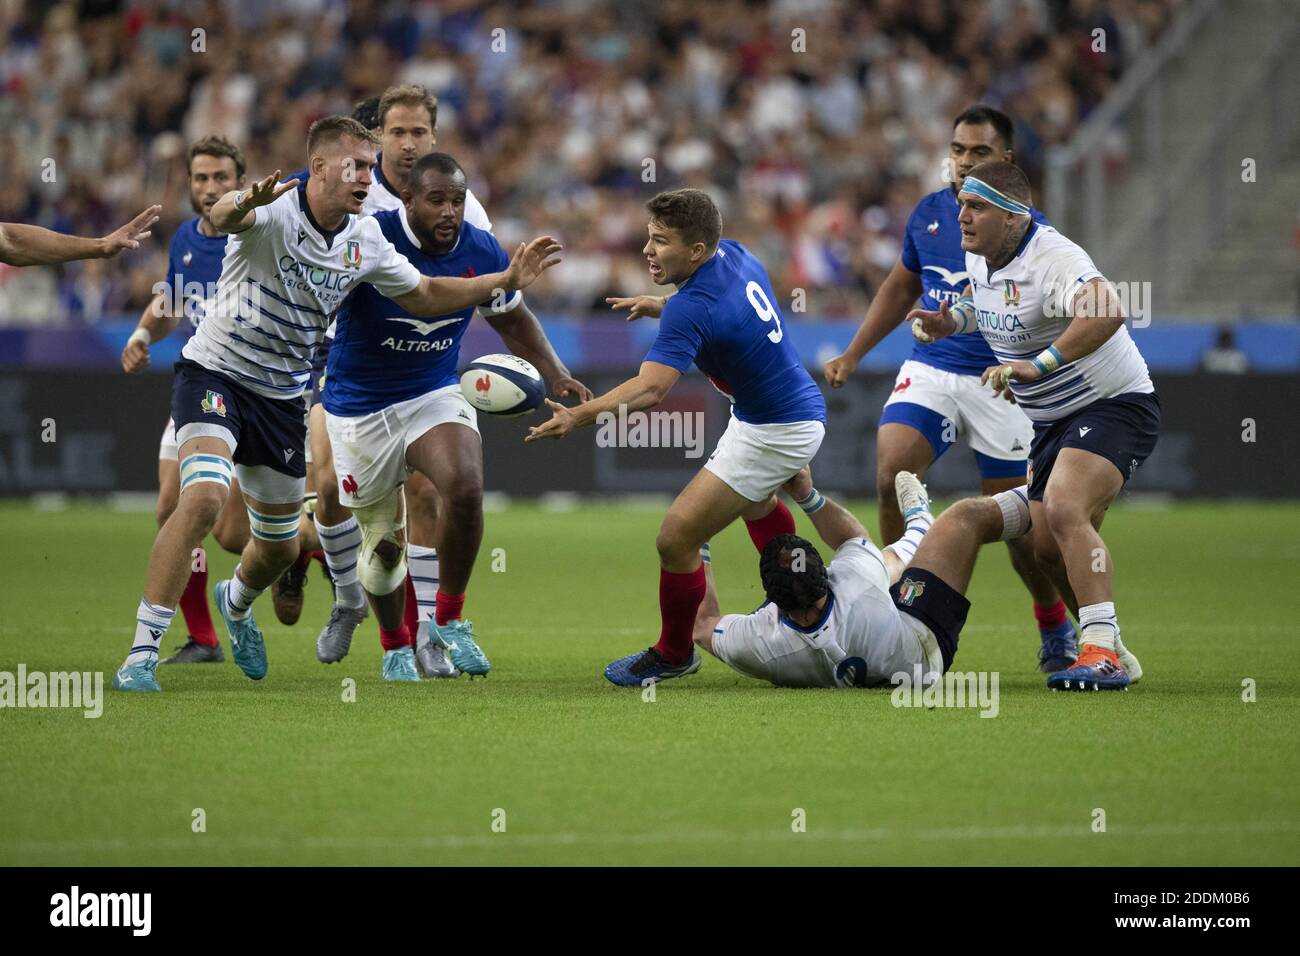 Antoine DUPONT in action during 2019 Rugby World Cup warm-up match France v  Italy at Stade De France on August 30, 2019 in Paris, France. France won  47-19. Photo by Loic Baratoux/ABACAPRESS.COM